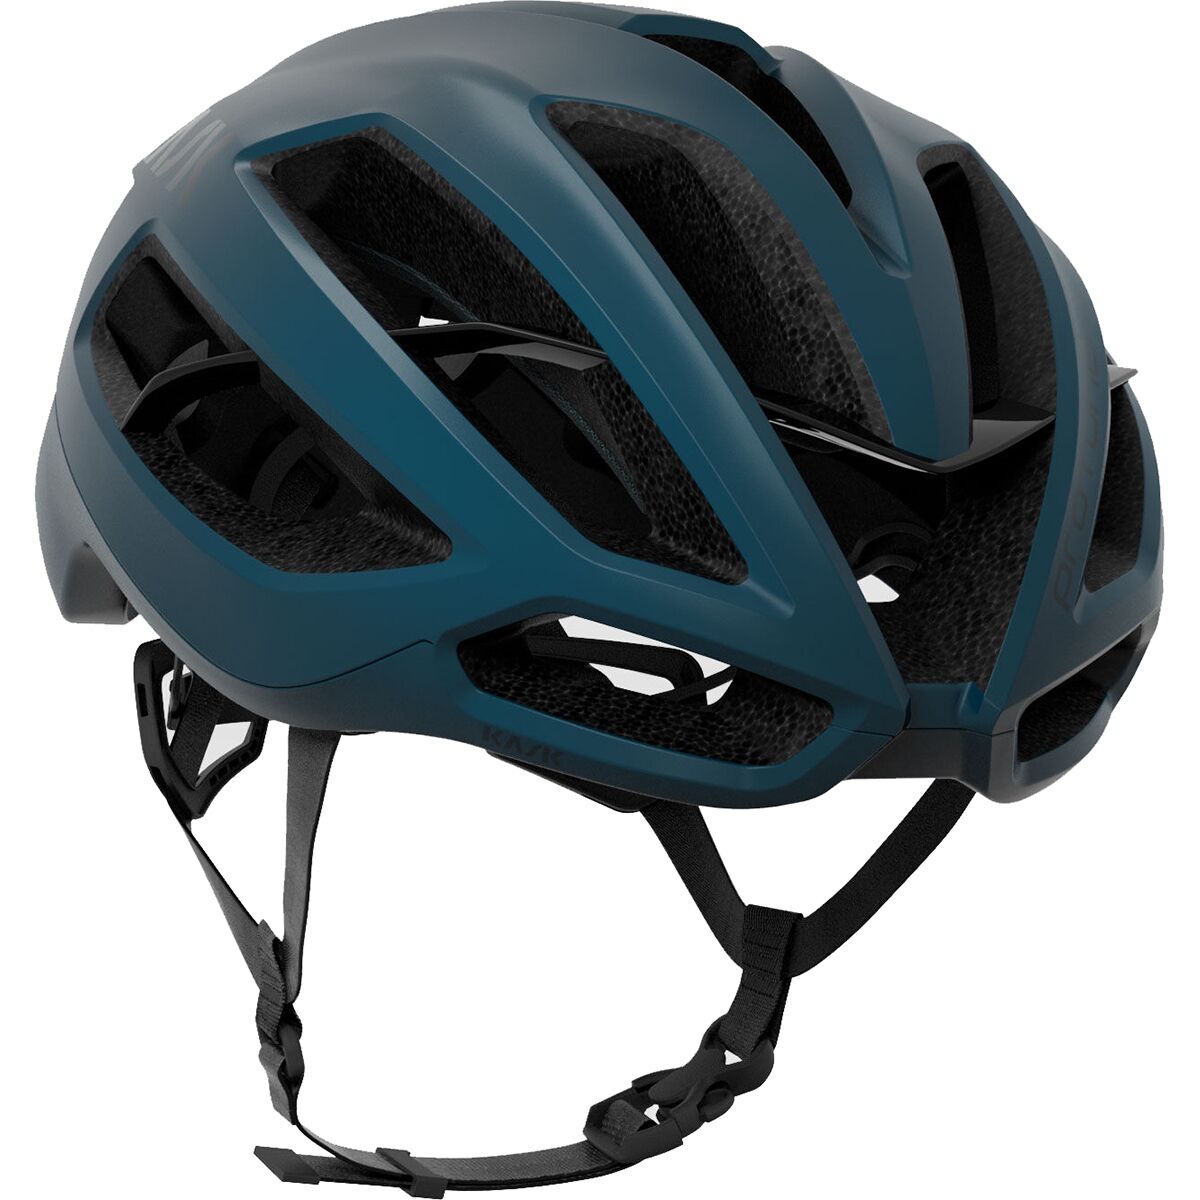 KASK Protone ICON Bicycle Helmet - Black Matte - Small Sporting Goods >  Cycling > Helmets & Protective Gear > Helmets KASK Full Catalog – The Gear  Attic